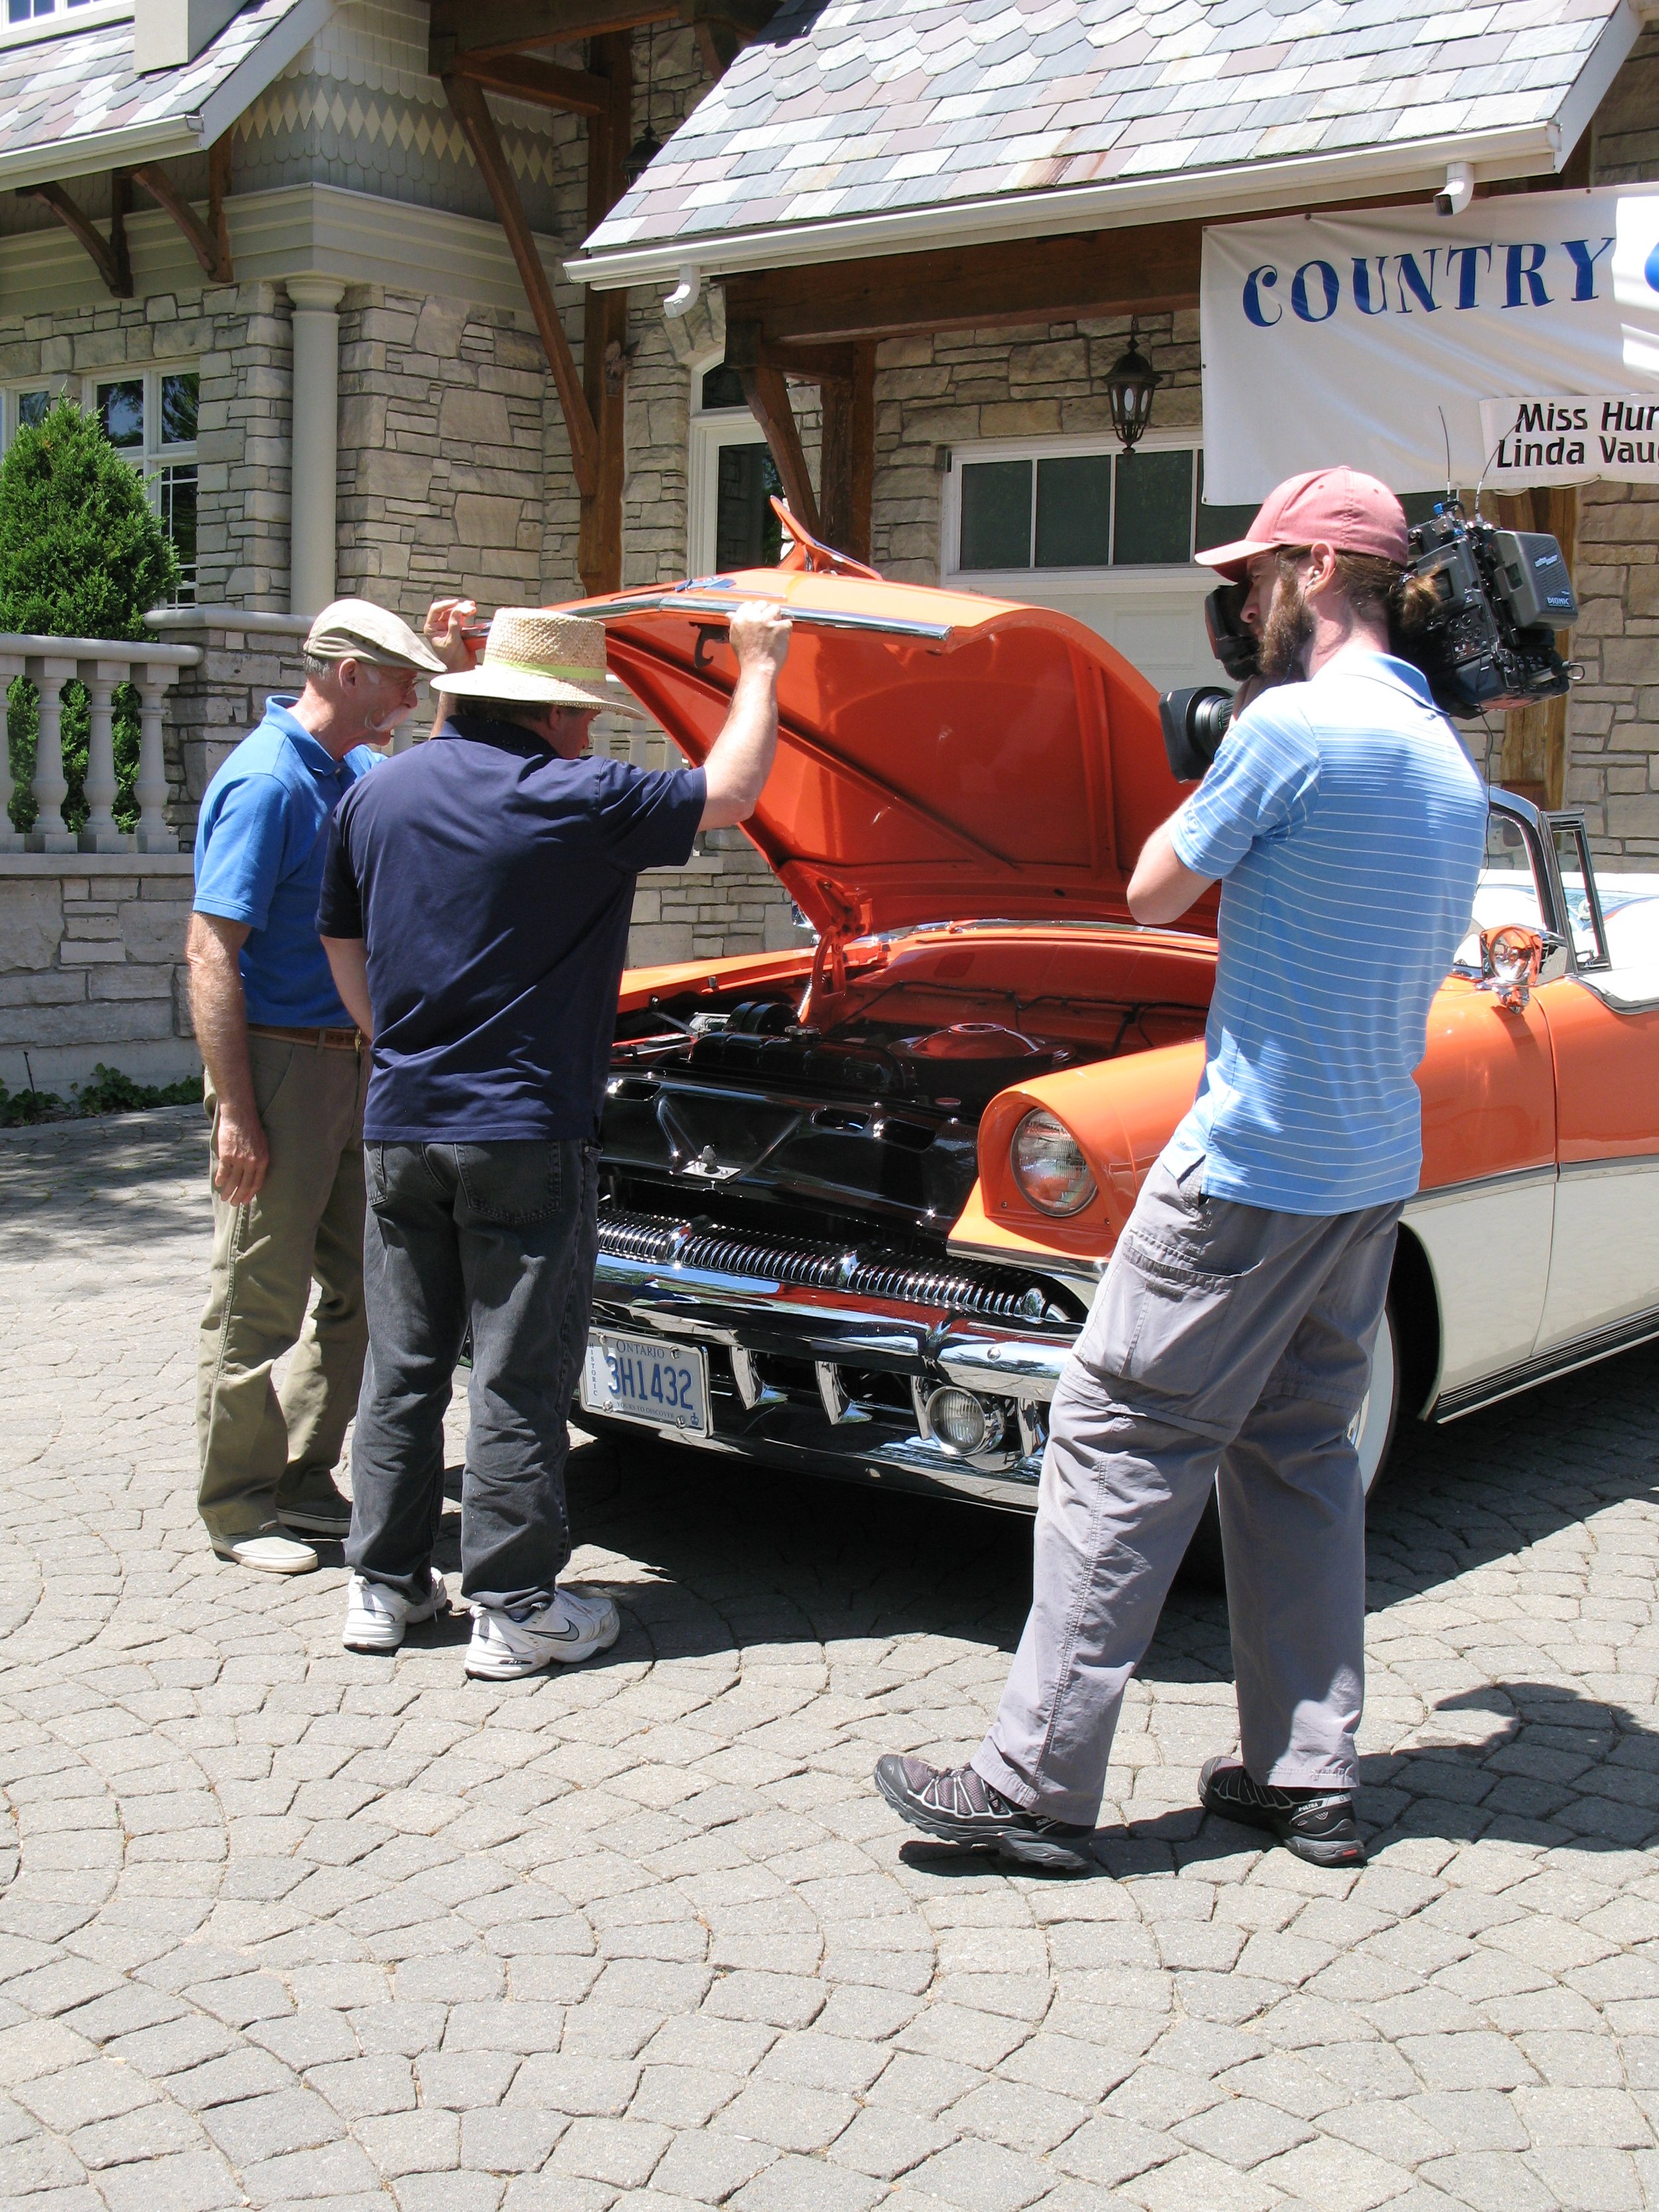 Dennis Gage, Filming - My Classic Car Show, 2015 - Episode 16